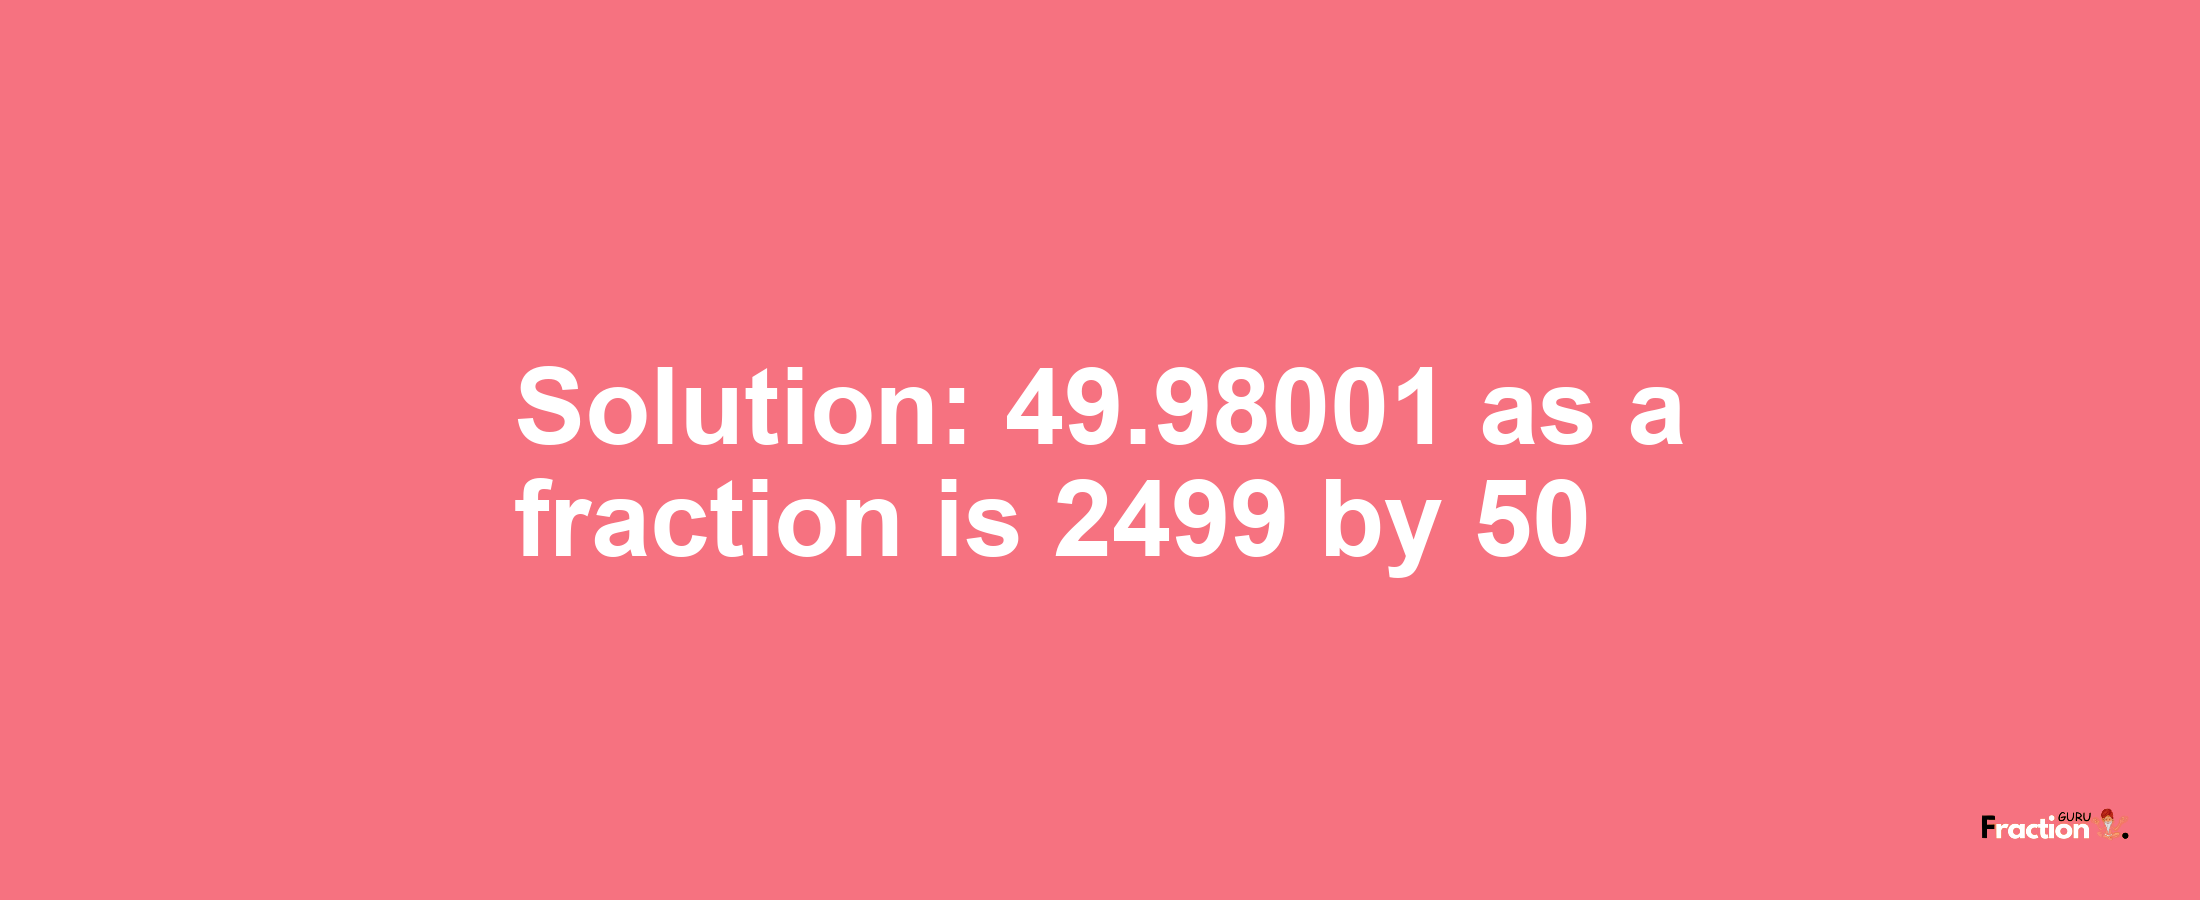 Solution:49.98001 as a fraction is 2499/50